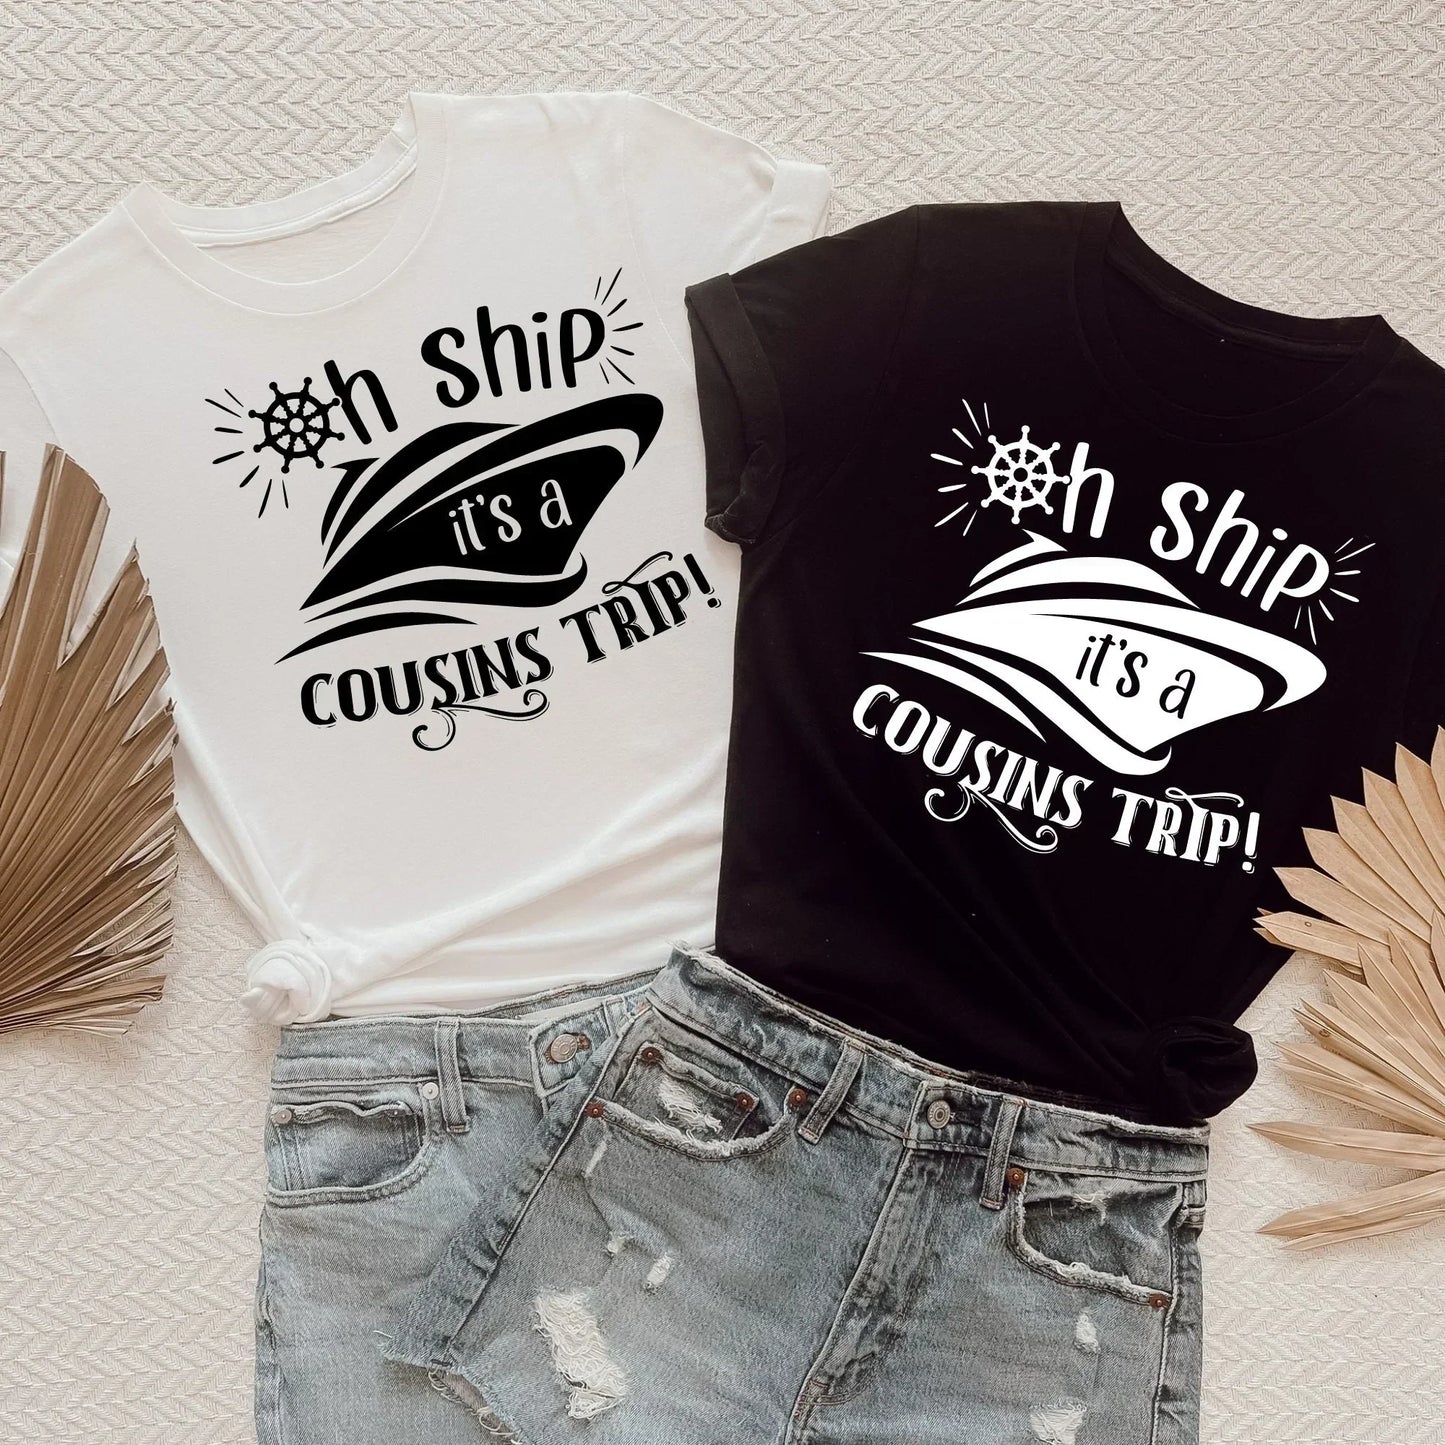 Cousin Crew Shirts, Cousins Cruise T-shirts, Matching Family Vacation Tees, Cousin gifts, Cousin shirts, Christmas Cousin Girls or Guys Trip HMDesignStudioUS